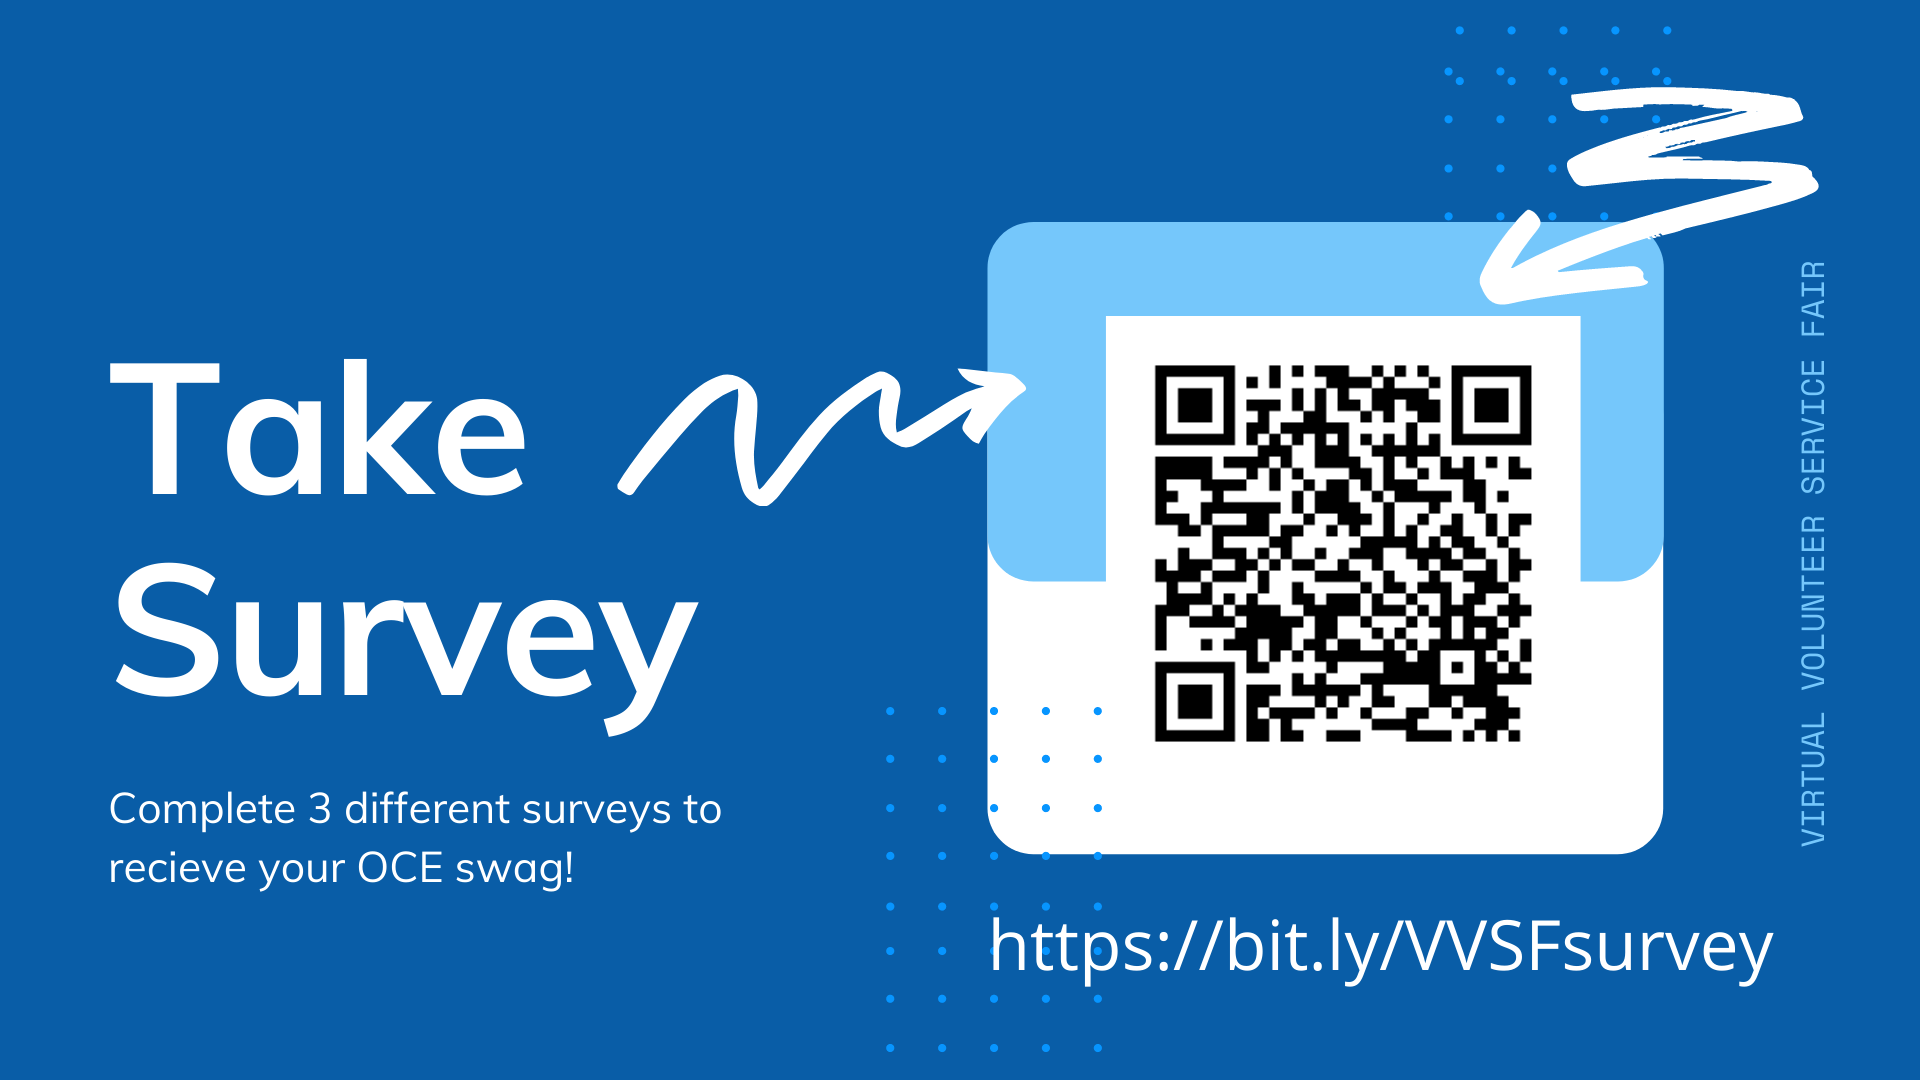 Complete 3 different surveys to receive OCE swag. Don't forget to take the survey.